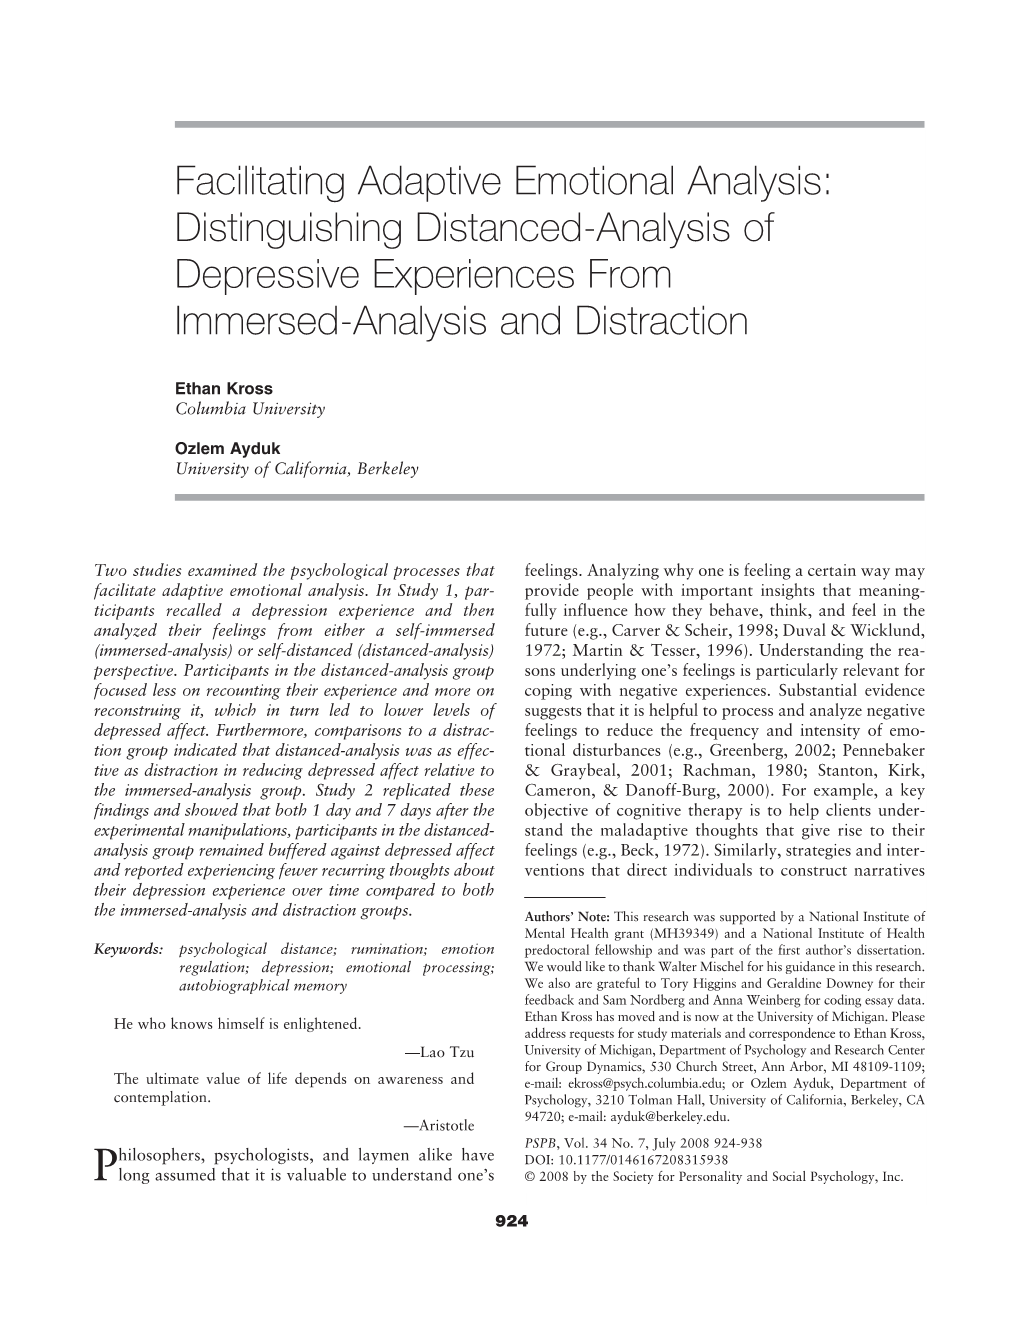 Facilitating Adaptive Emotional Analysis: Distinguishing Distanced-Analysis of Depressive Experiences from Immersed-Analysis and Distraction